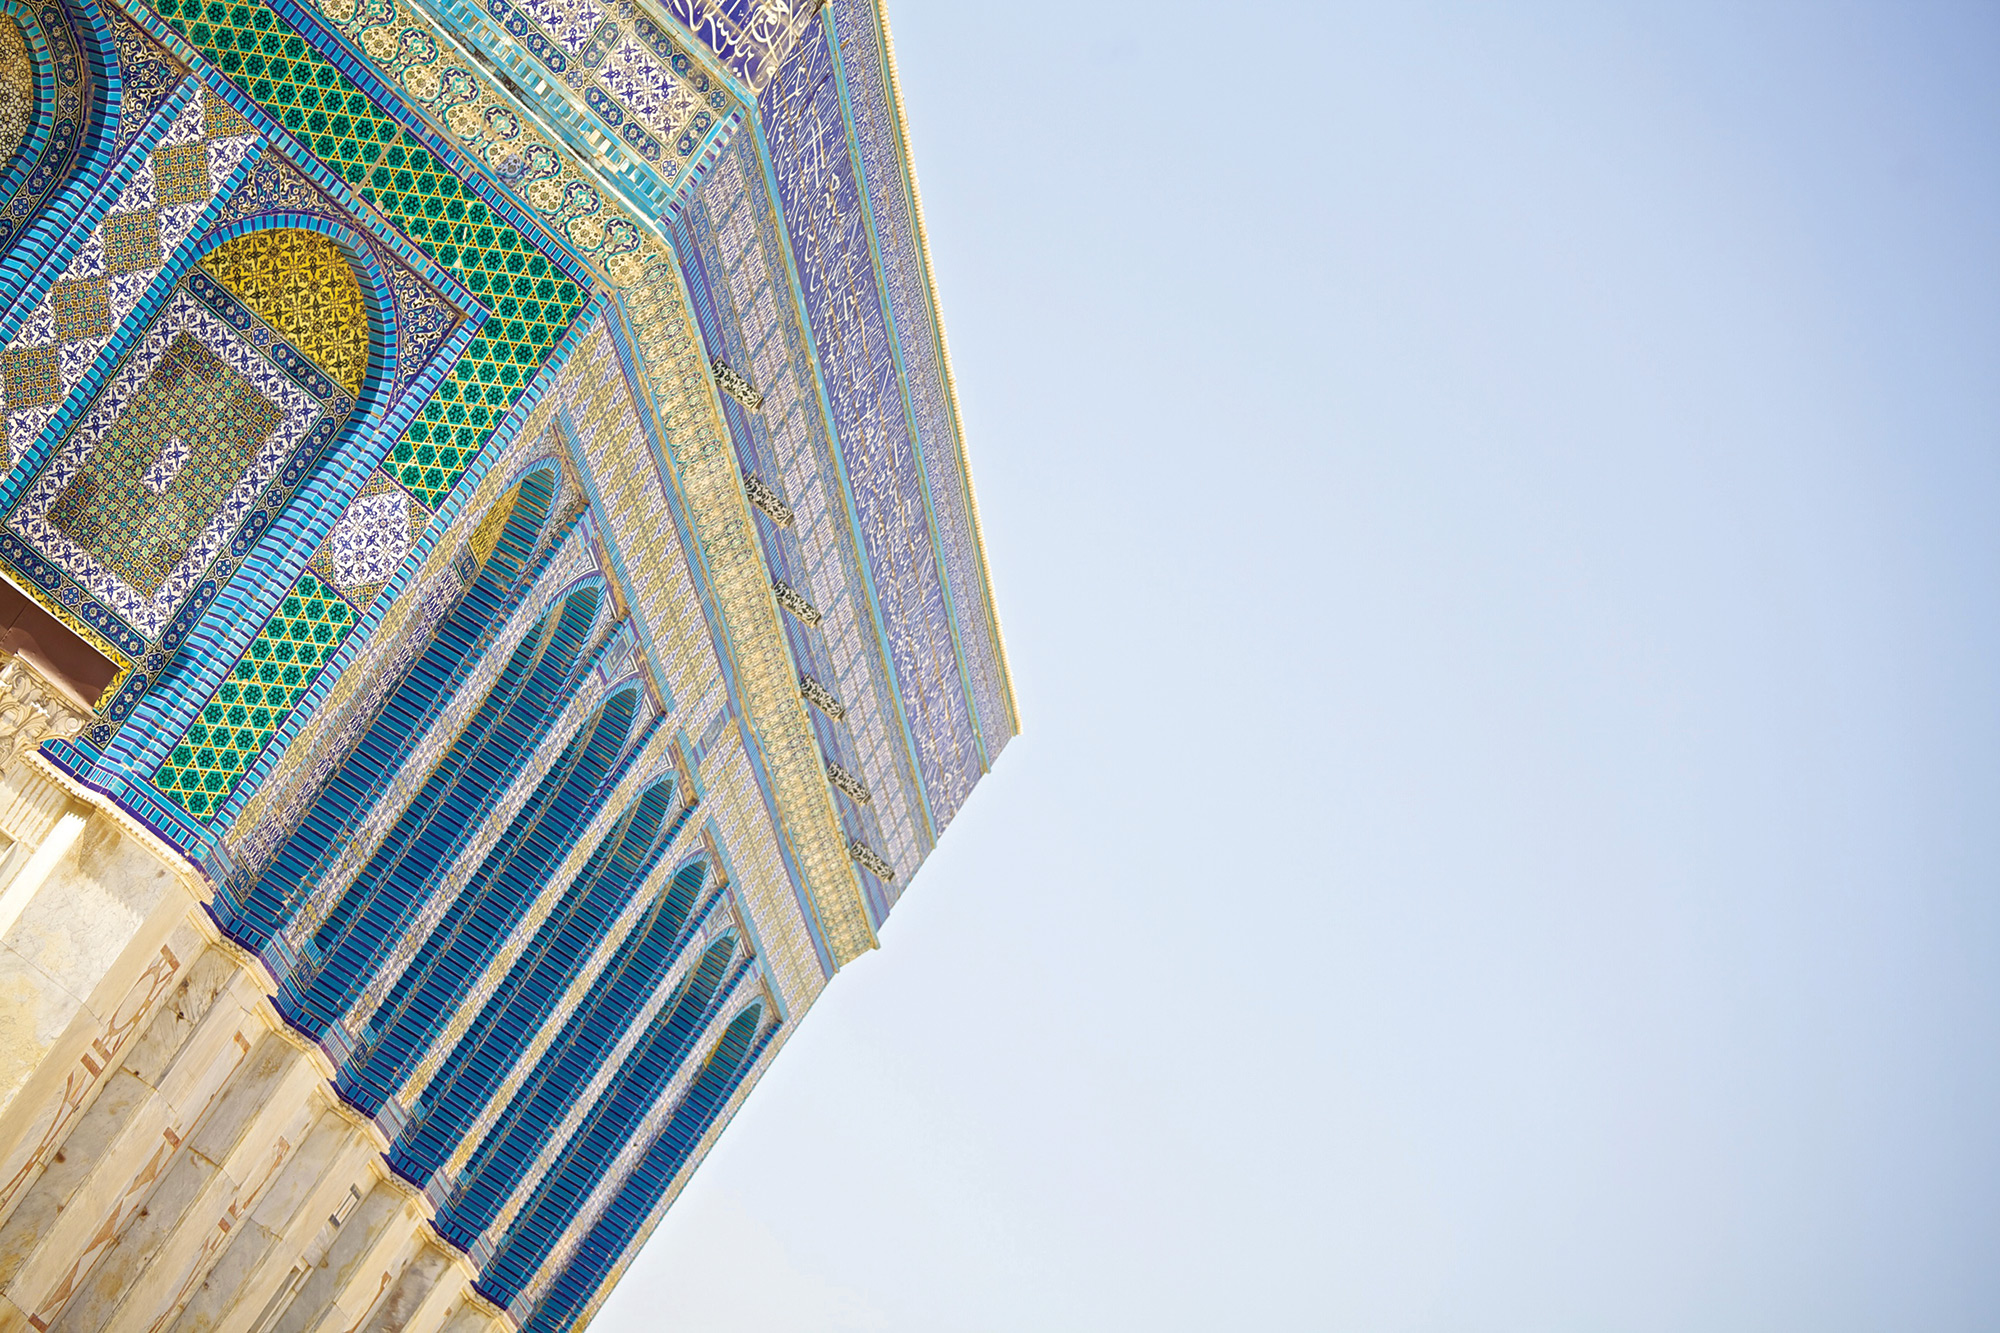 The vibrant colors of the Dome of the Rock